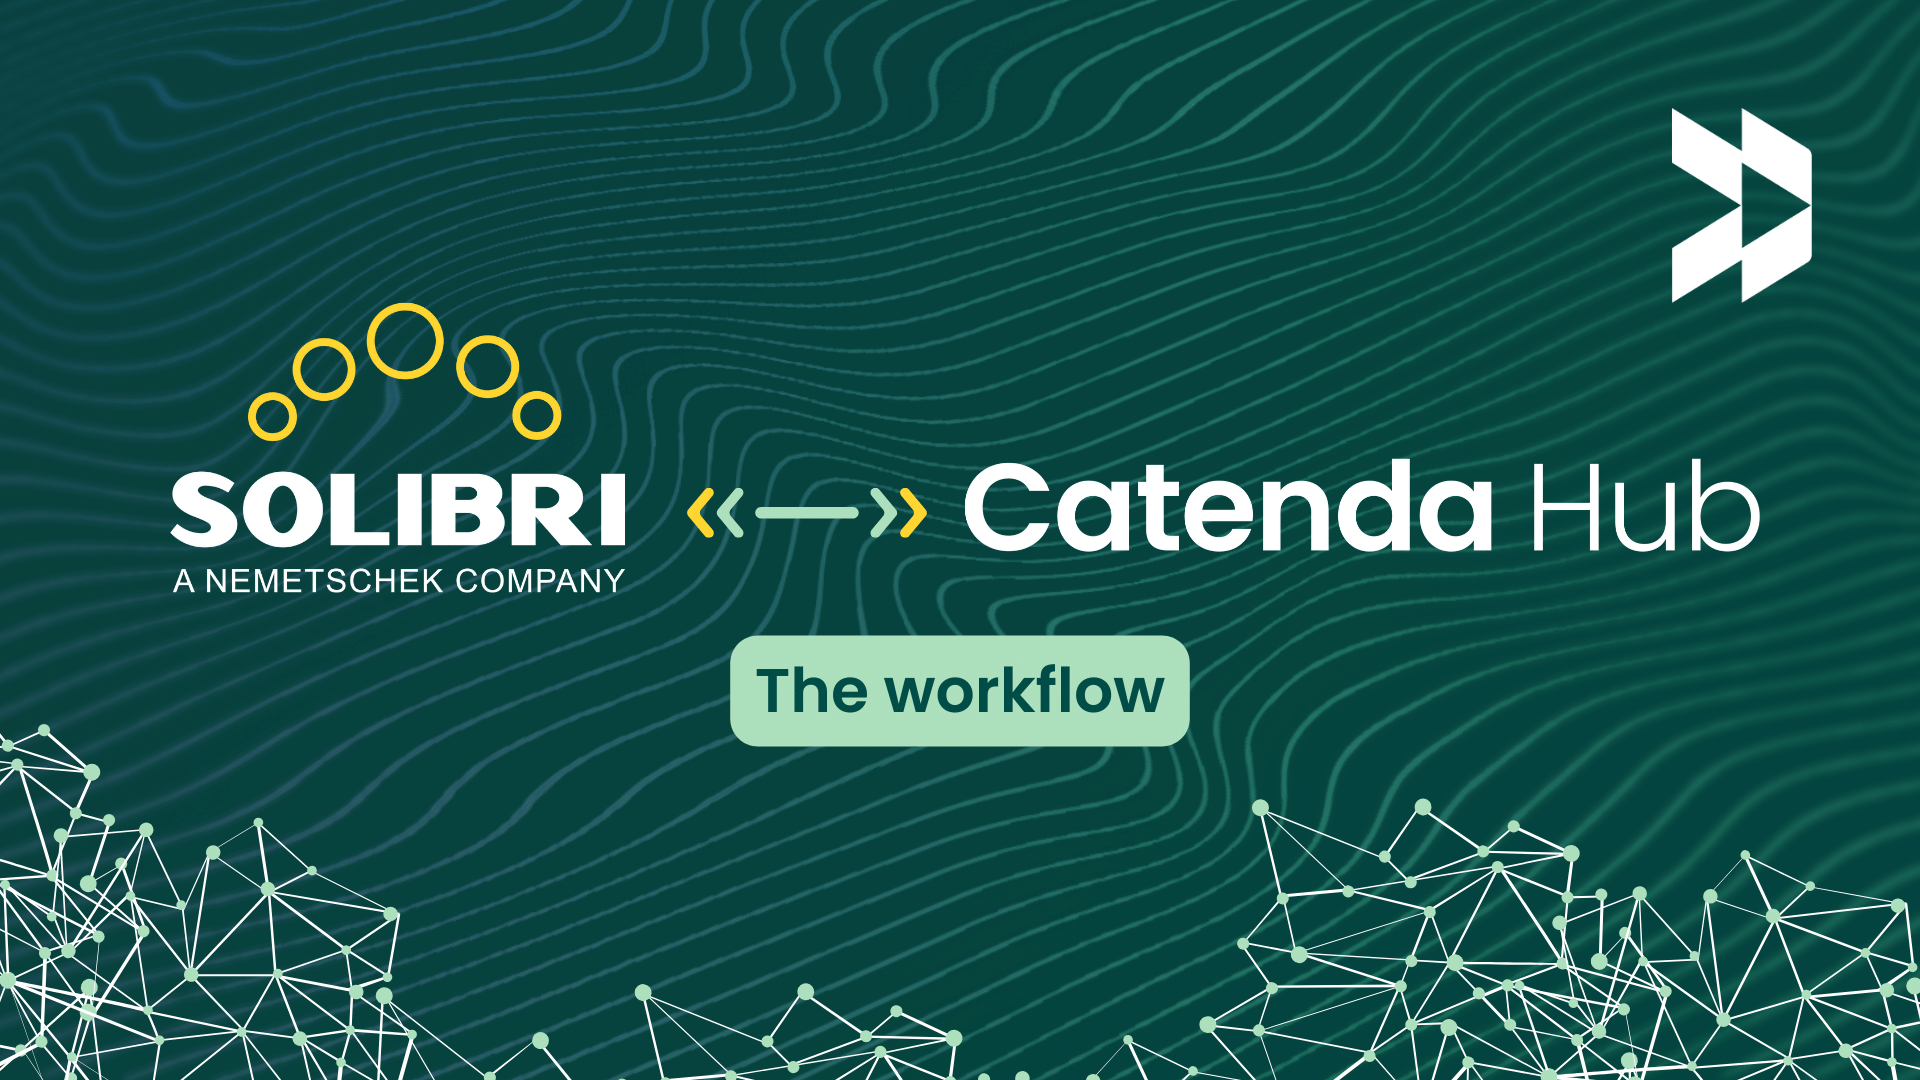 Solibri a nemetschek company and Catenda Hub BCF connection, discover the workflow